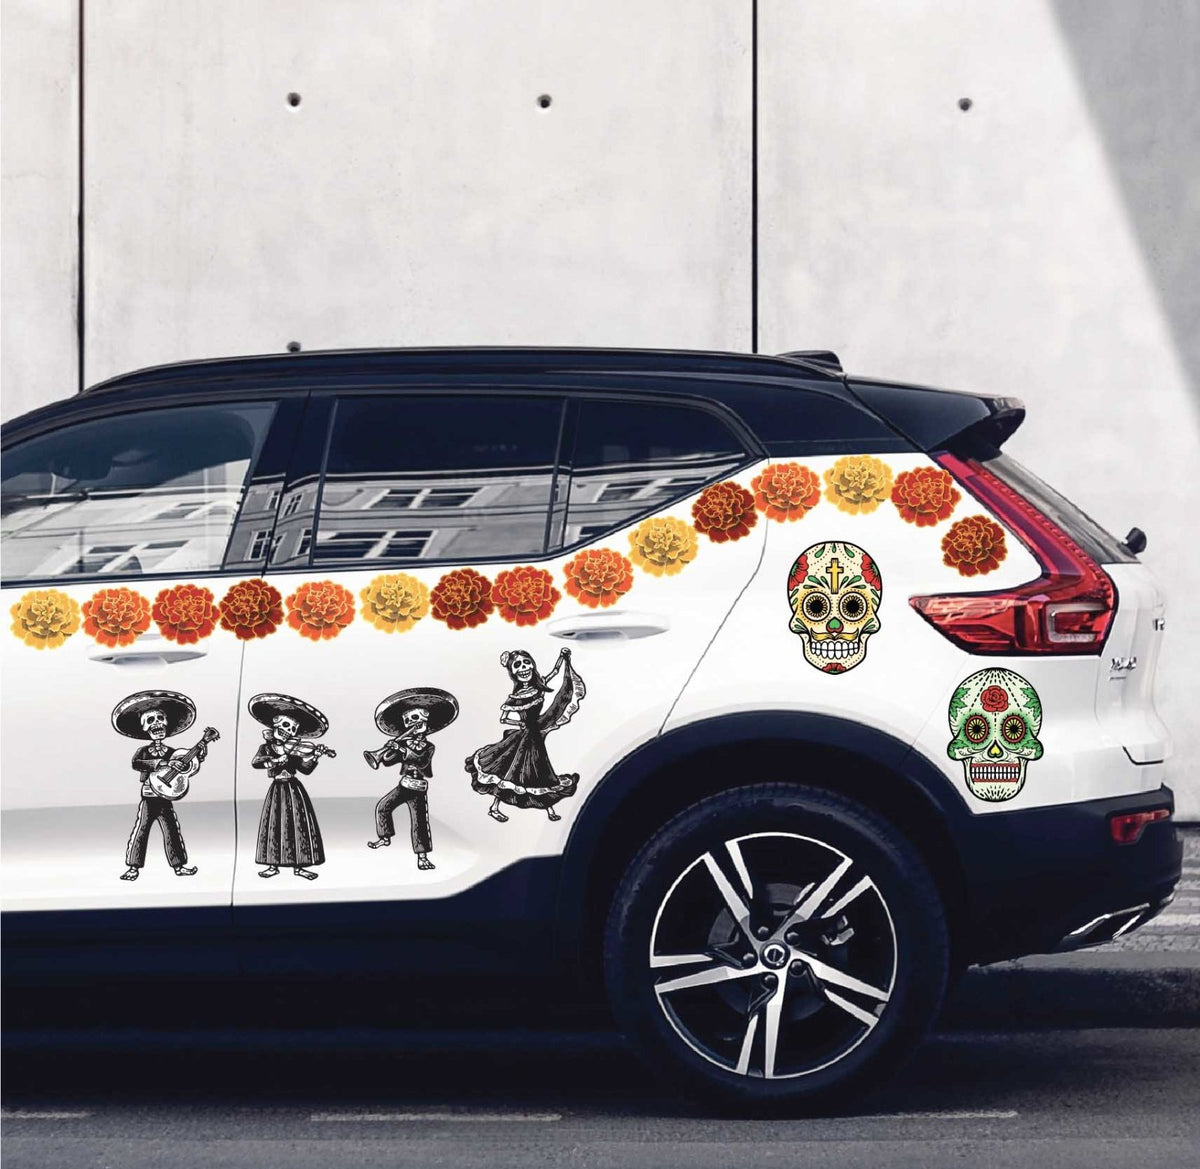 White SUV decorated with colorful Cover-Alls Day of the Dead Painted Skull Calaveras decals, including painted skull figures and flowers, parked by a white wall.